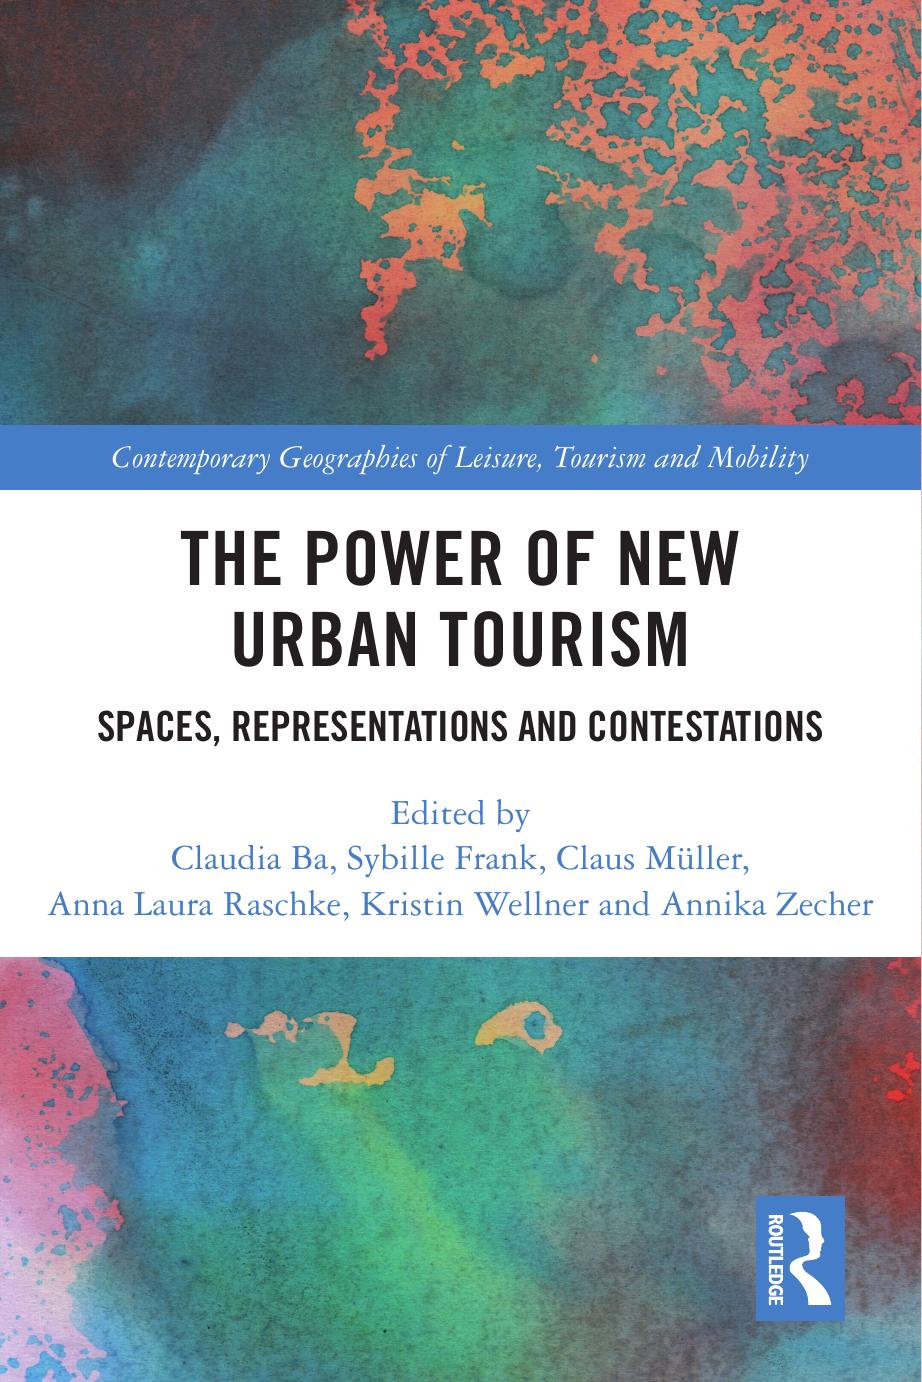 (eBook PDF)The Power of New Urban Tourism: Spaces, Representations and Contestations by Claudia Ba,Claudia Ba